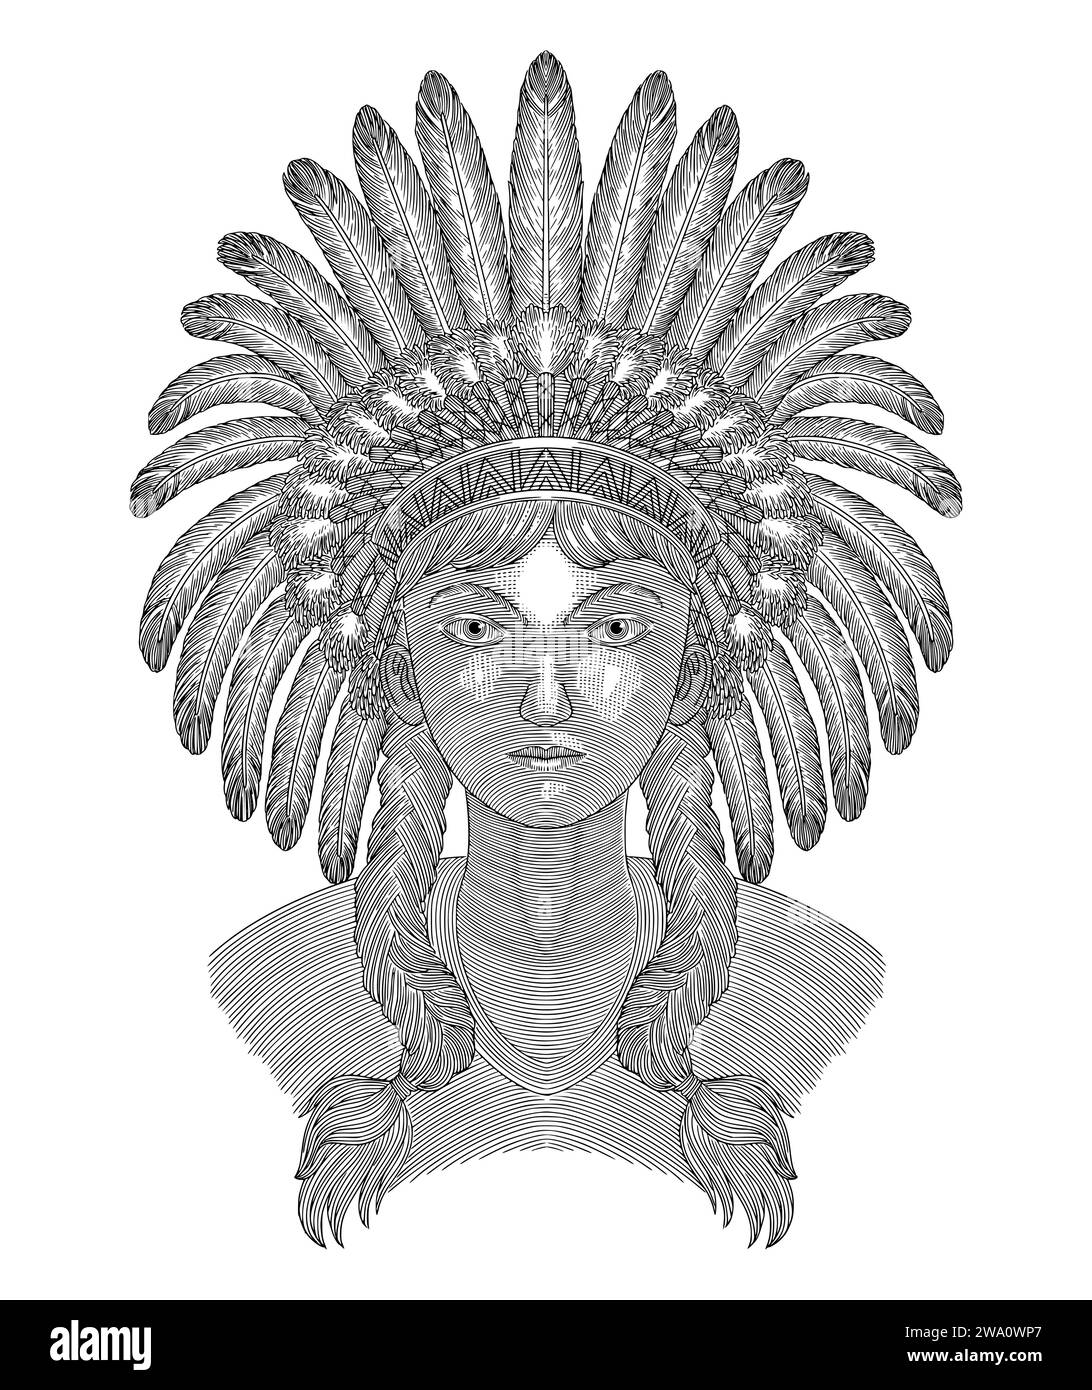 Girl with indian traditional headdress, native american woman. Vintage engravig drawing style Stock Vector